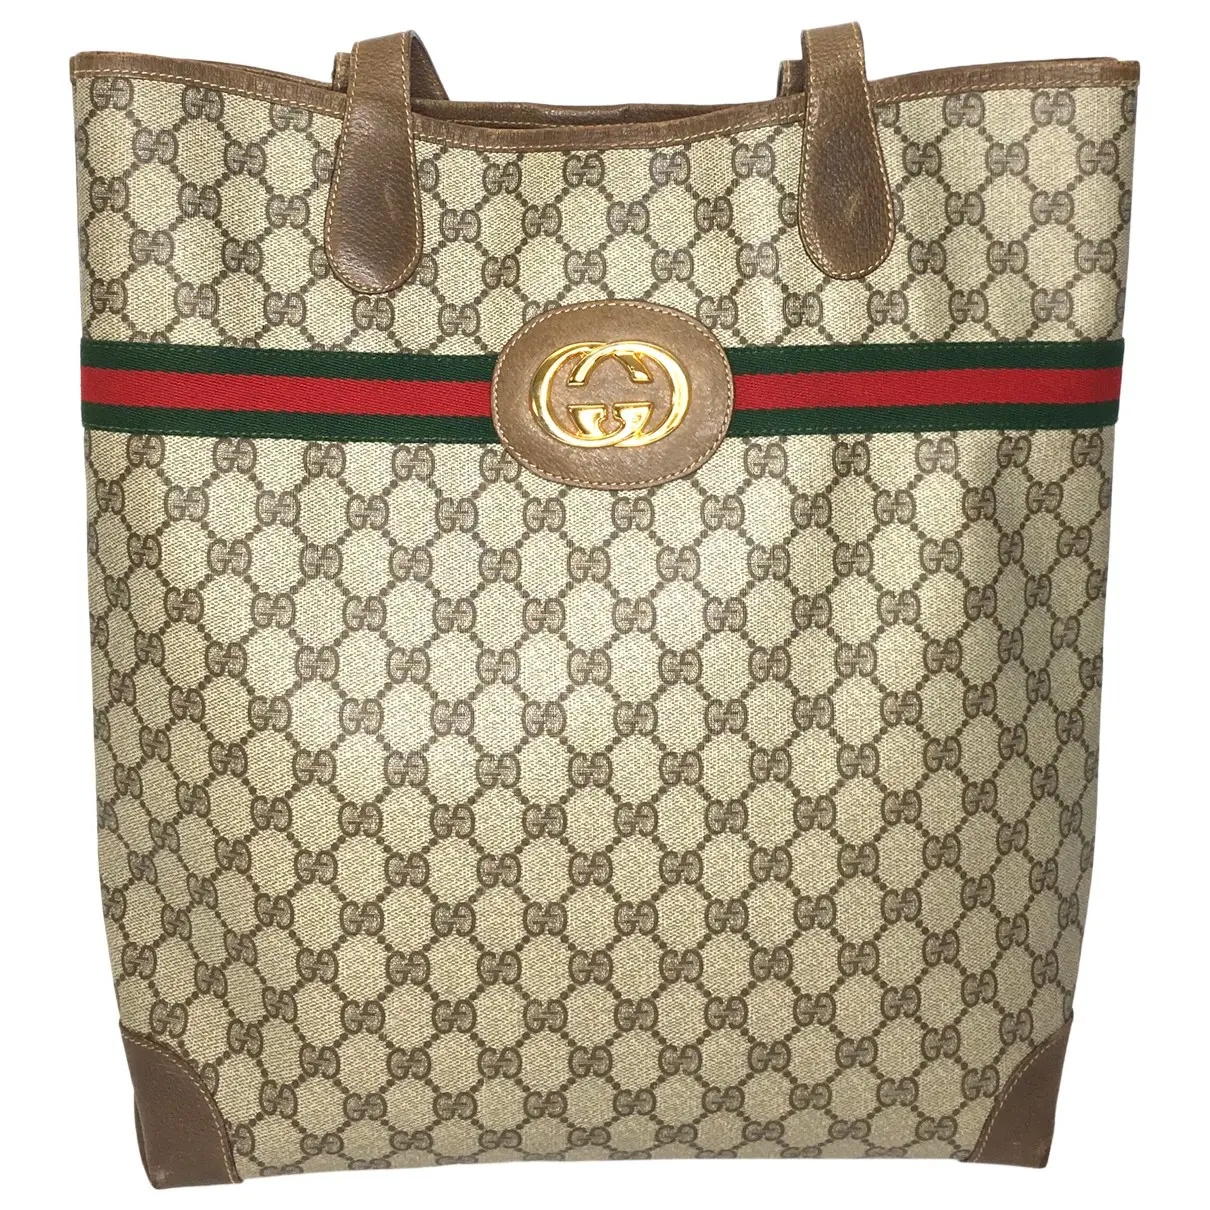 Ophidia patent leather tote Gucci